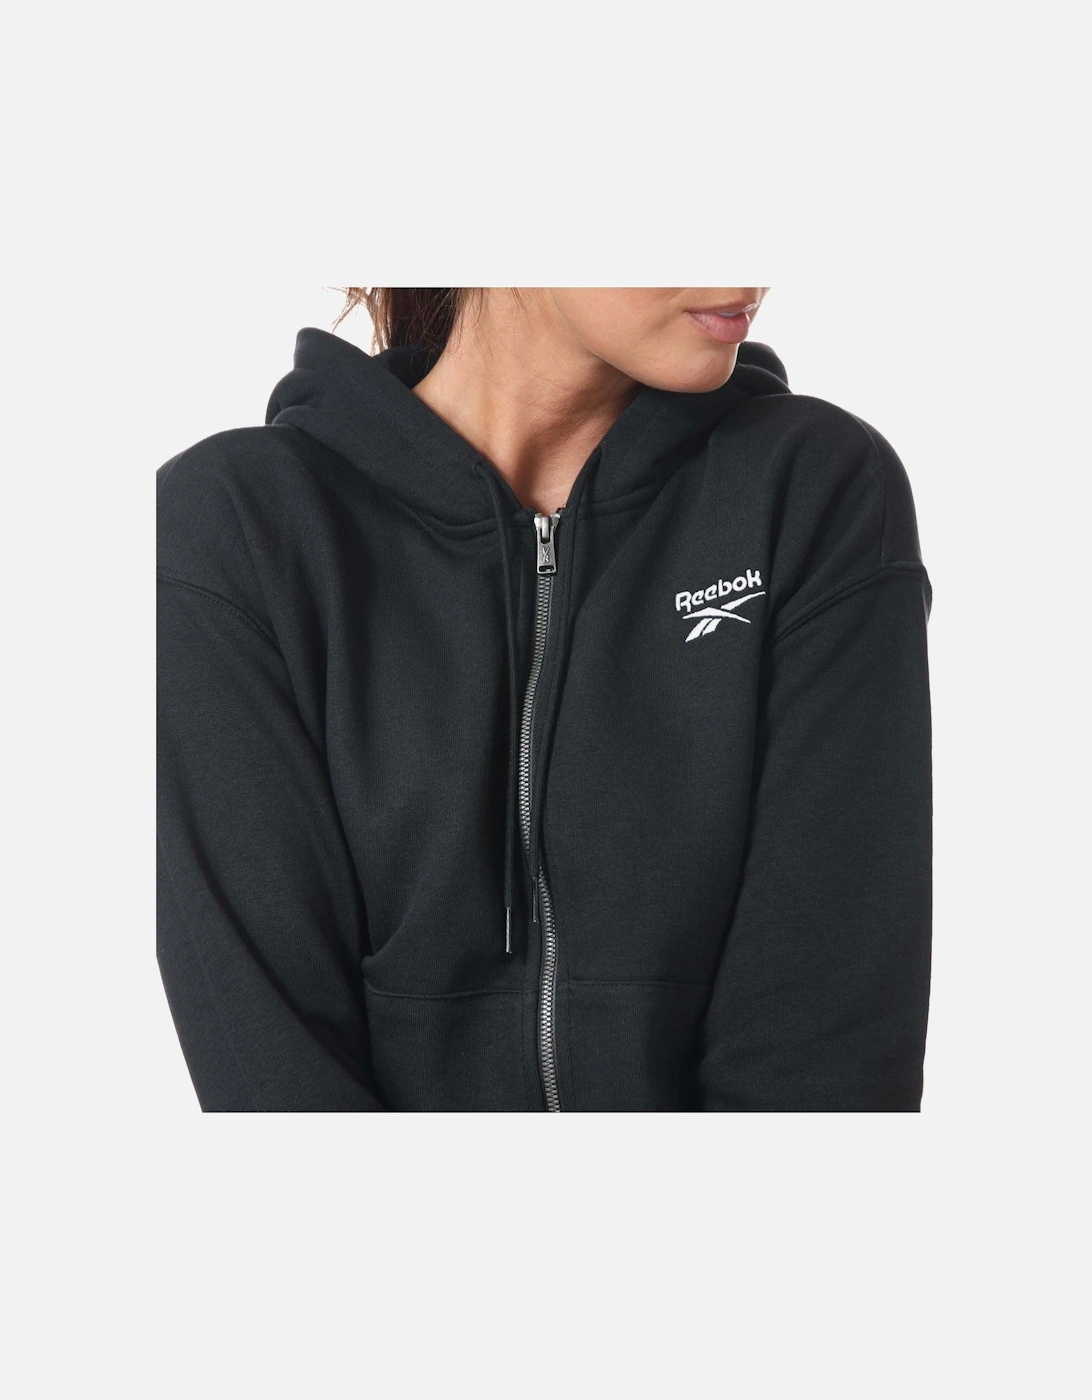 Womens Identity Zip-Up Track Top